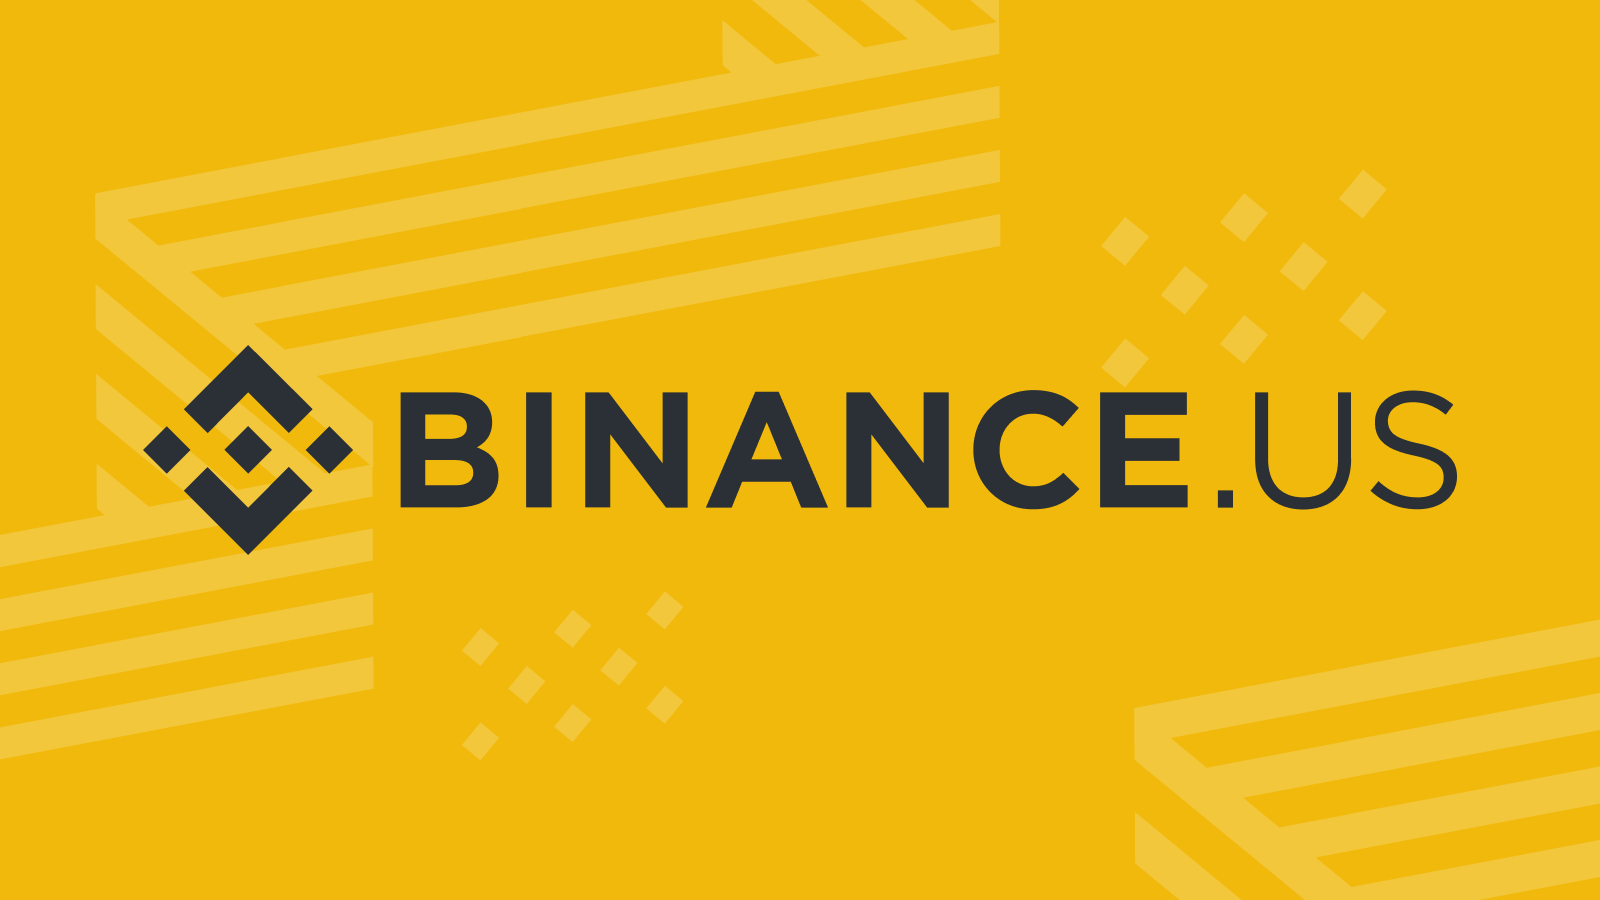 Binance.US Awarded Elite ISO and IEC Accreditation for World-Class Security Measures